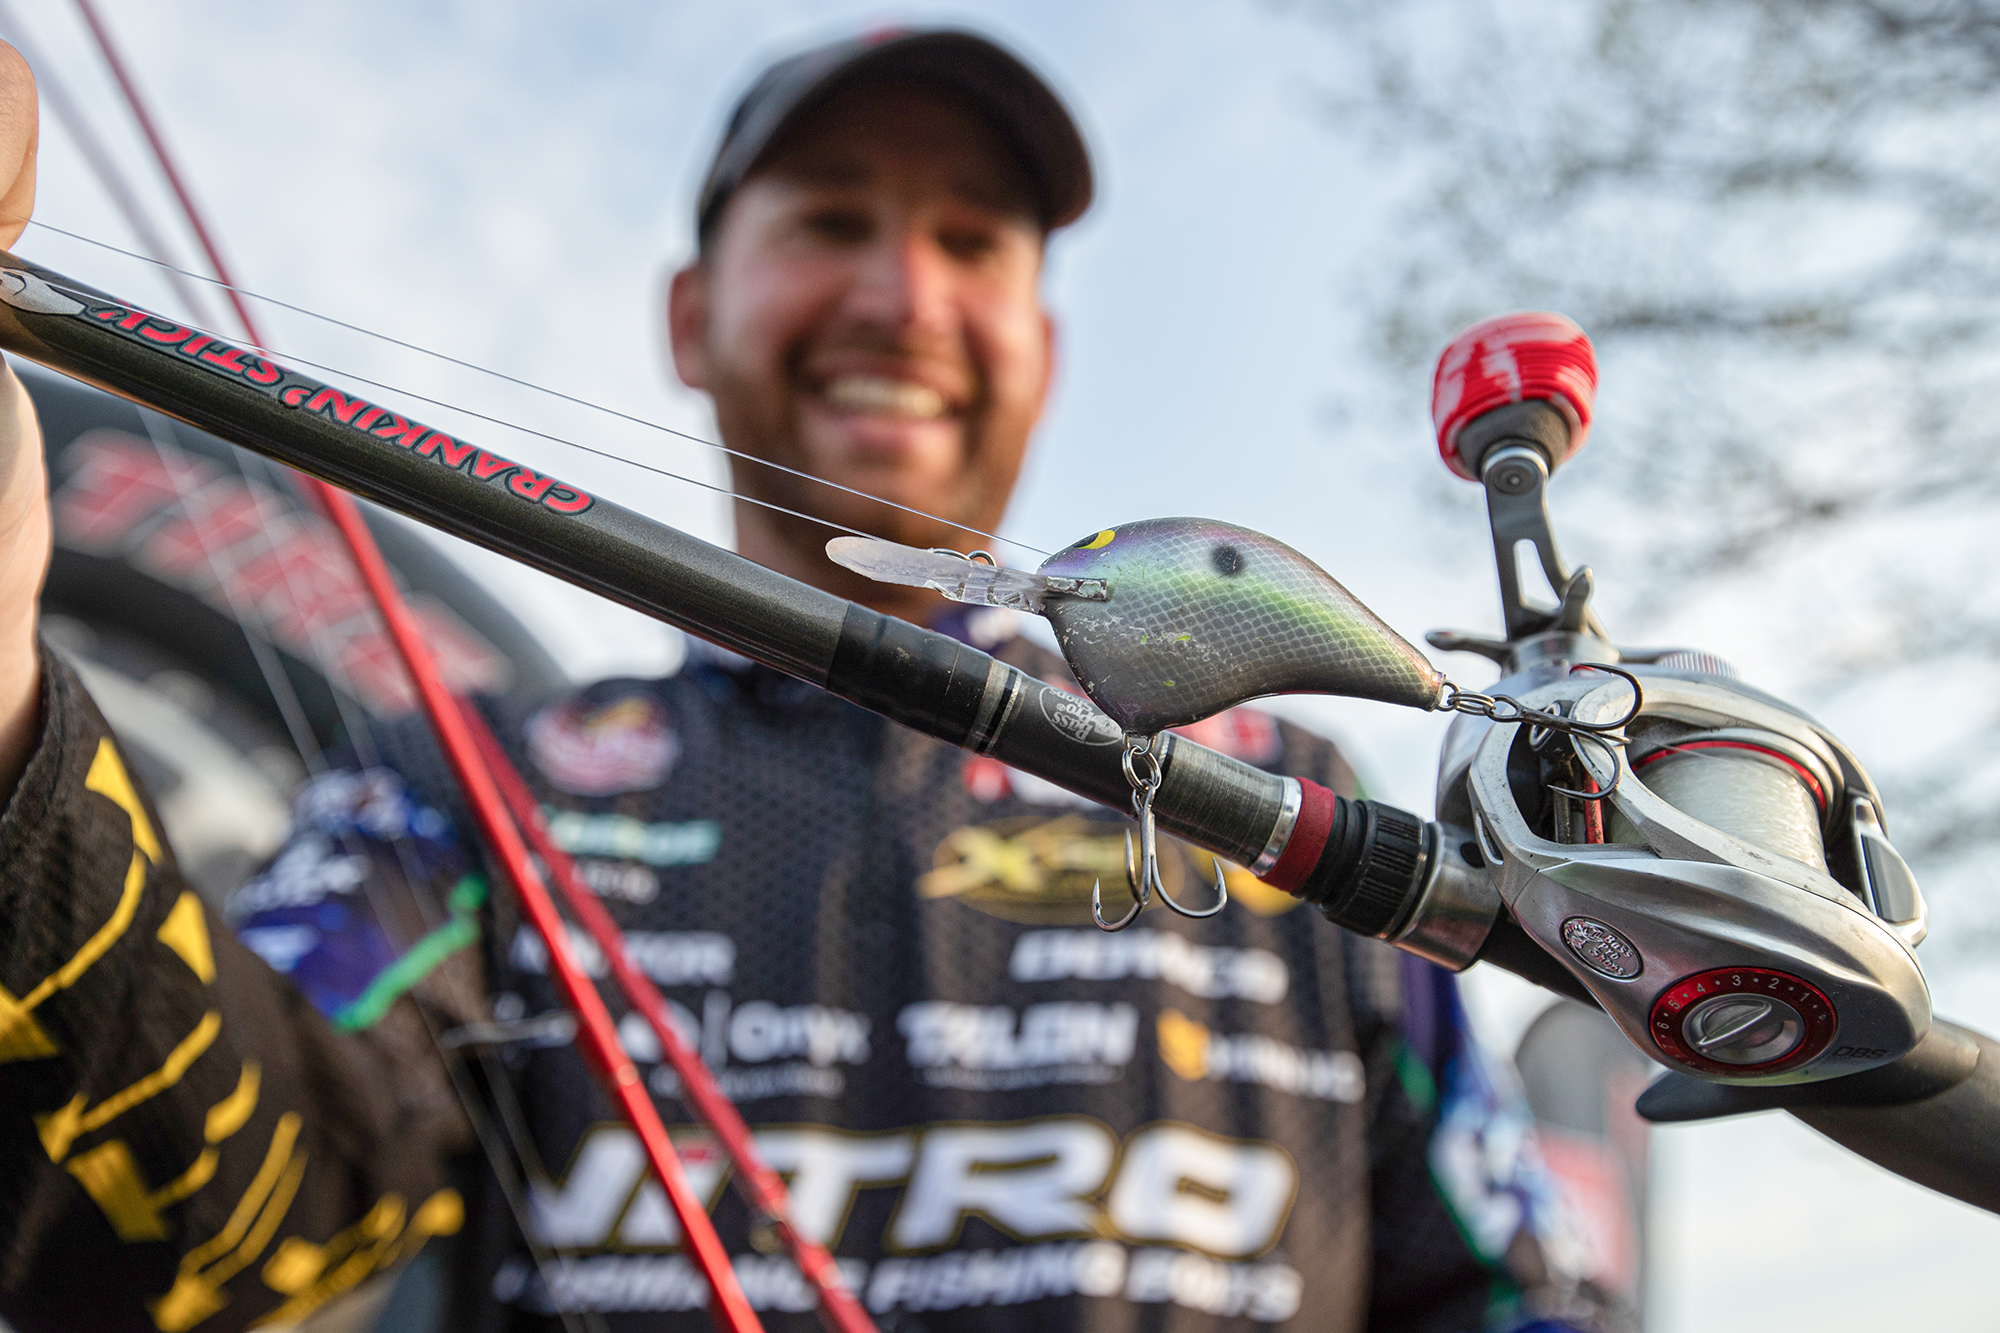 Tungsten Thunder Cricket Overview with Andy Montgomery [NEXT LEVEL]  In  heavily pressure fishing situations, smaller compact baits have helped many  anglers to generate bite. Andy Montgomery gives us an overview of